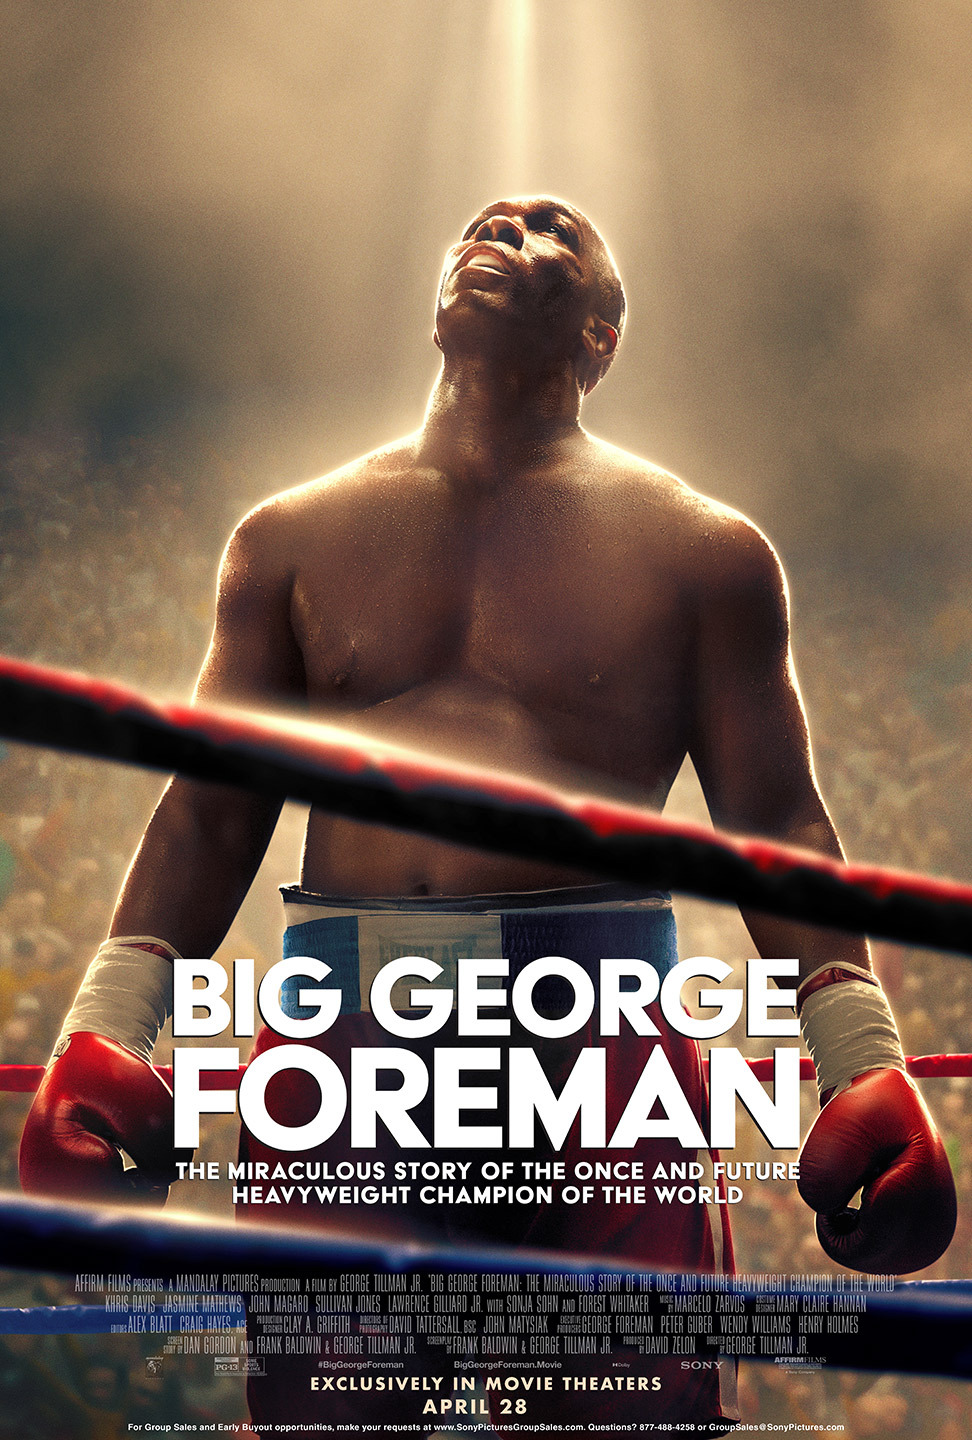 BIG GEORGE FOREMAN THE MIRACULOUS STORY OF THE ONCE AND FUTURE HEAVYWEIGHT CHAMPION OF THE WORLD picture photo